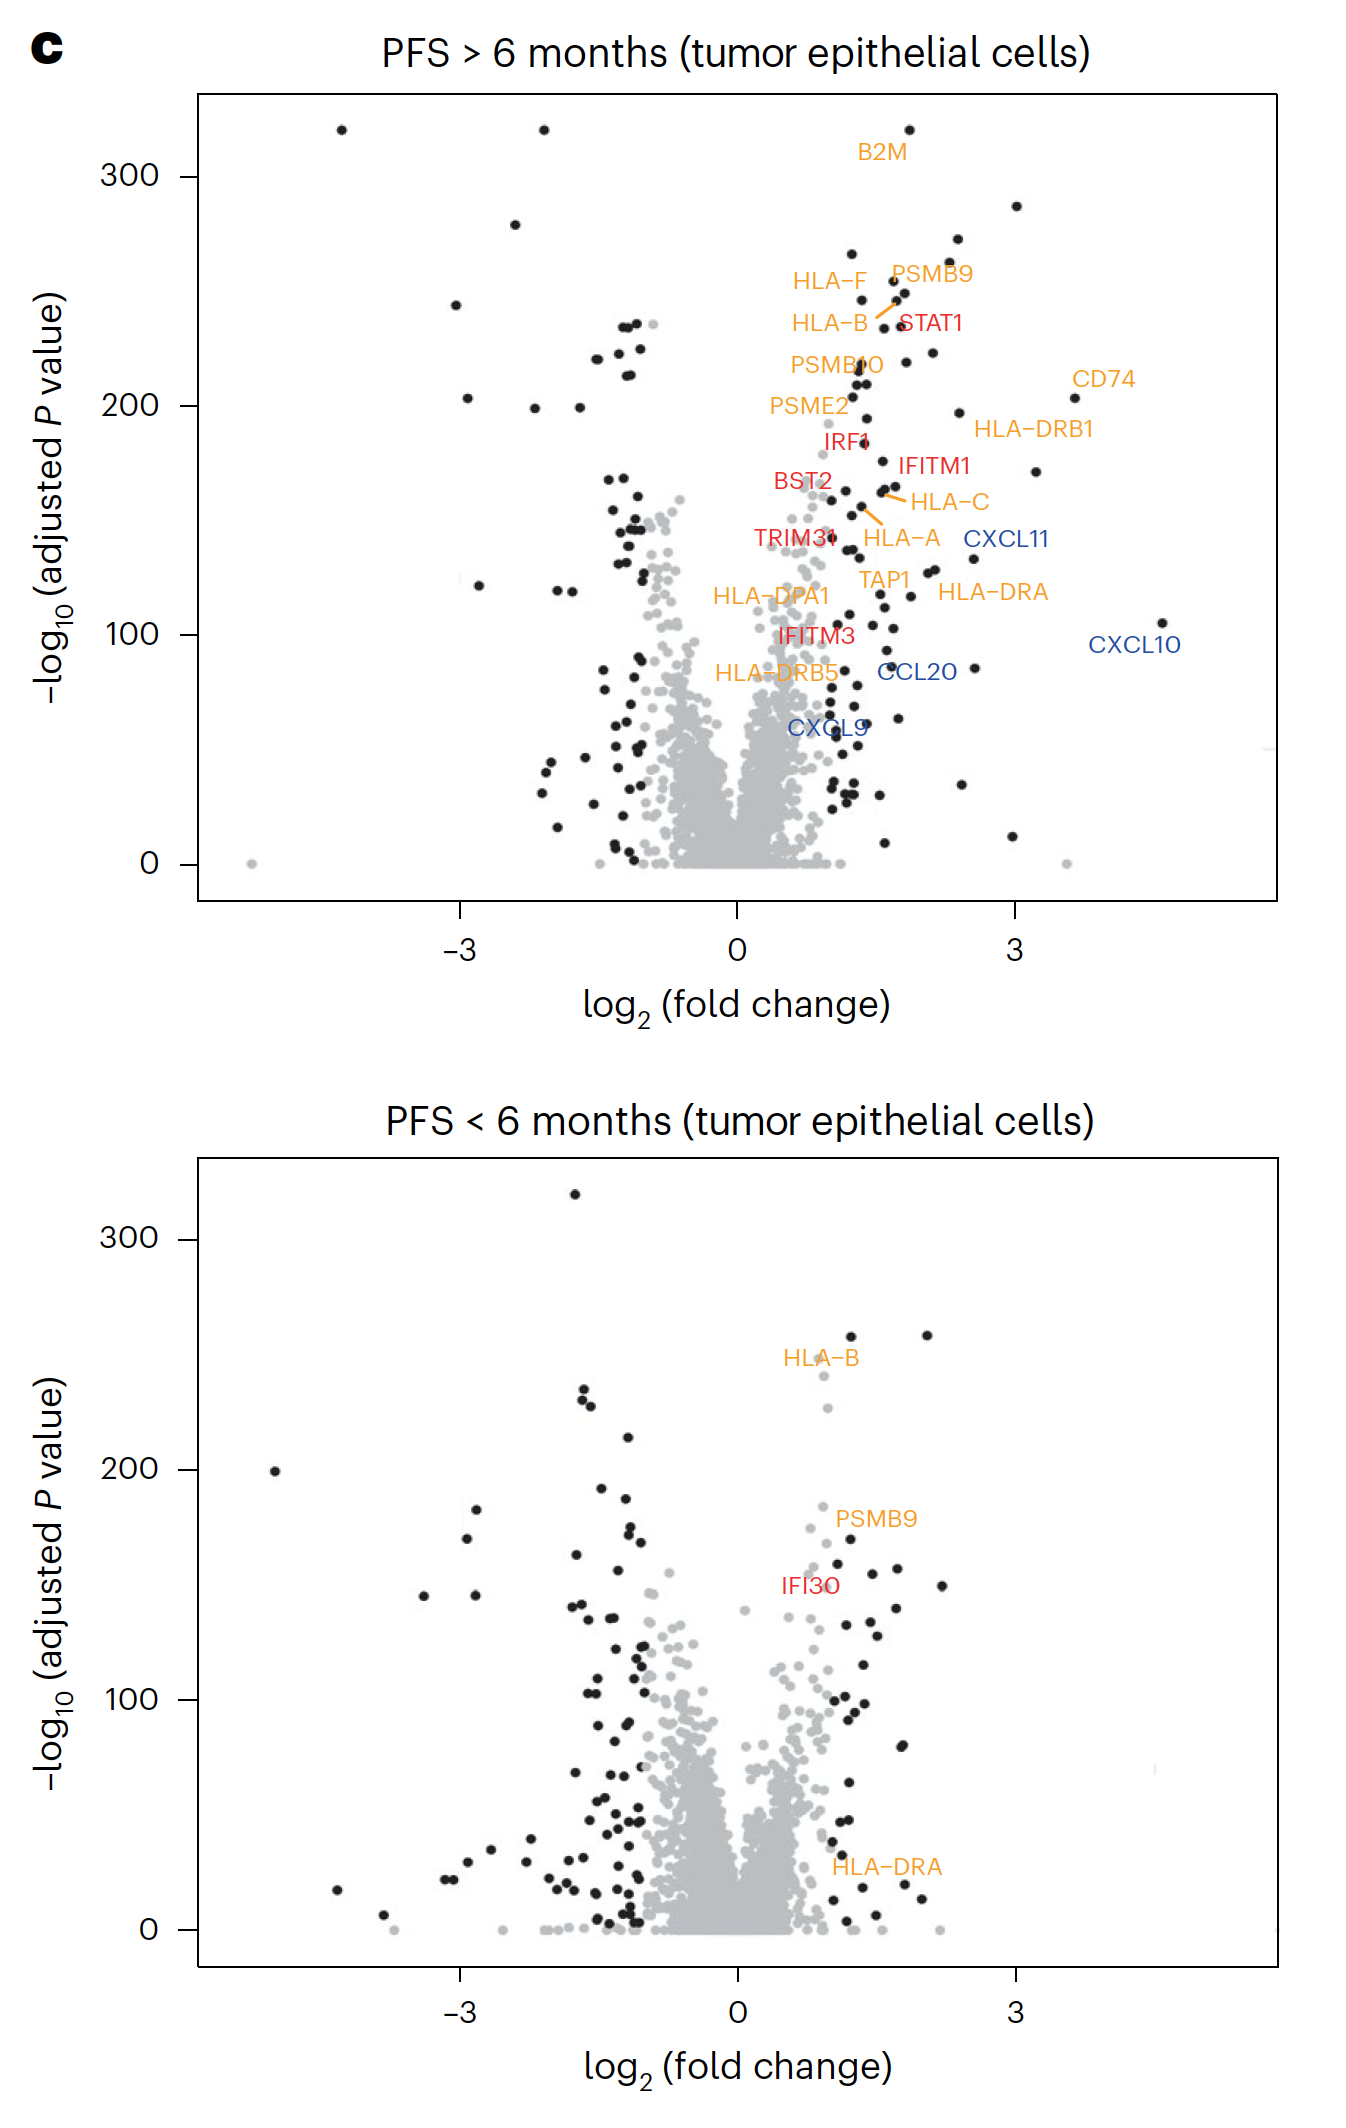  Figure 3c from Tian et al. Volcano plots indicate upregulated and downregulated differentially expressed genes (DEGs), on treatment versus pretreatment, in tumor epithelial cells of patients with PFS > 6 months and PFS < 6 months. Black dots on the volcano plots indicate adjusted P < 0.05 (two-tailed Wilcoxon rank sum test) and log2FC ≥ 1. Significant DEGs involved in antigen processing and presentation (gold), the IFN pathway (red), and chemokine activity (blue) are labeled. Credit: Tian J, et al. Nat Med 29:458–466 (2023). doi: 10.1038/s41591-022-02181-8 (CC BY 4.0). 